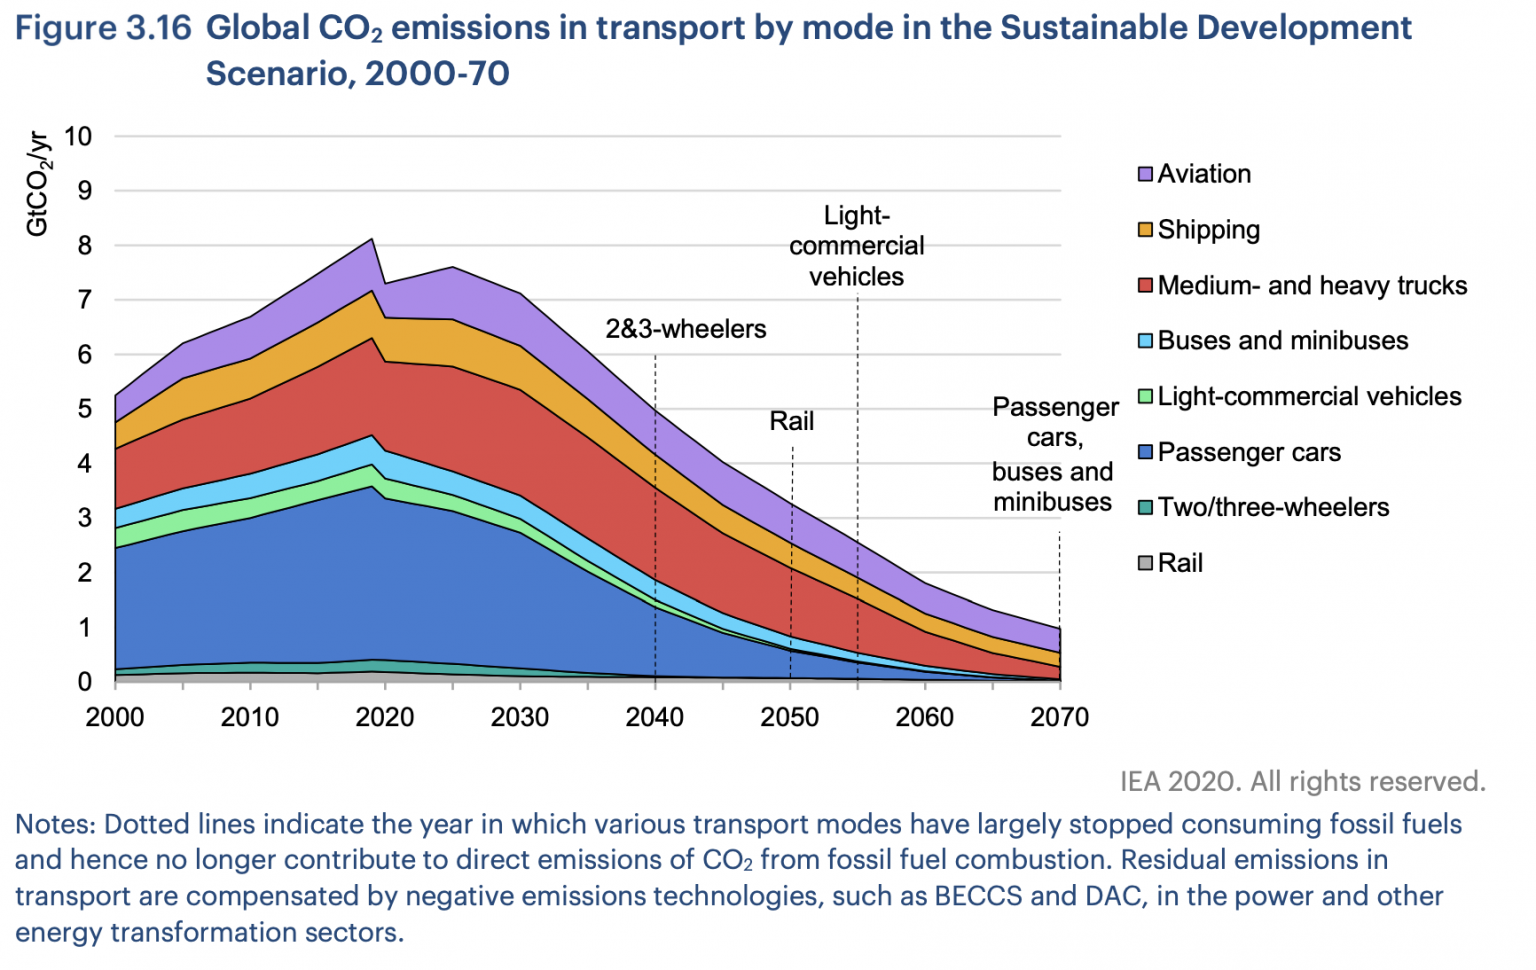 Cars, planes, trains where do CO2 emissions from transport come from